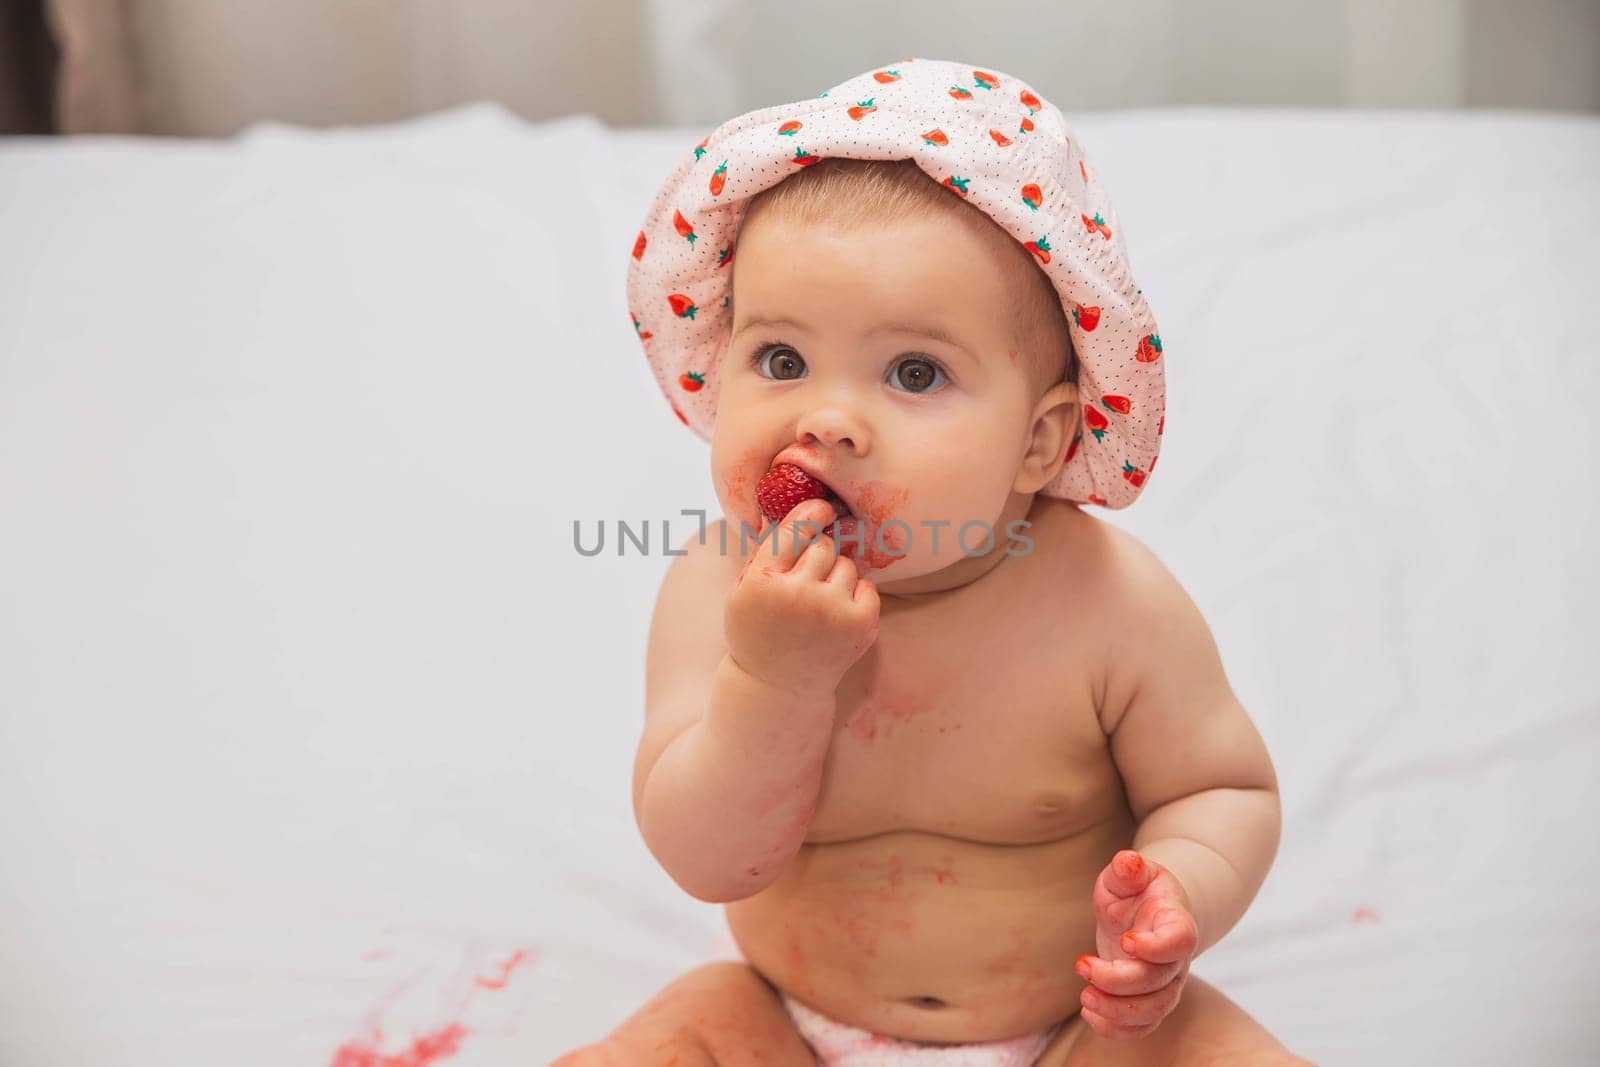 cute baby in a hat eating strawberries in bed.